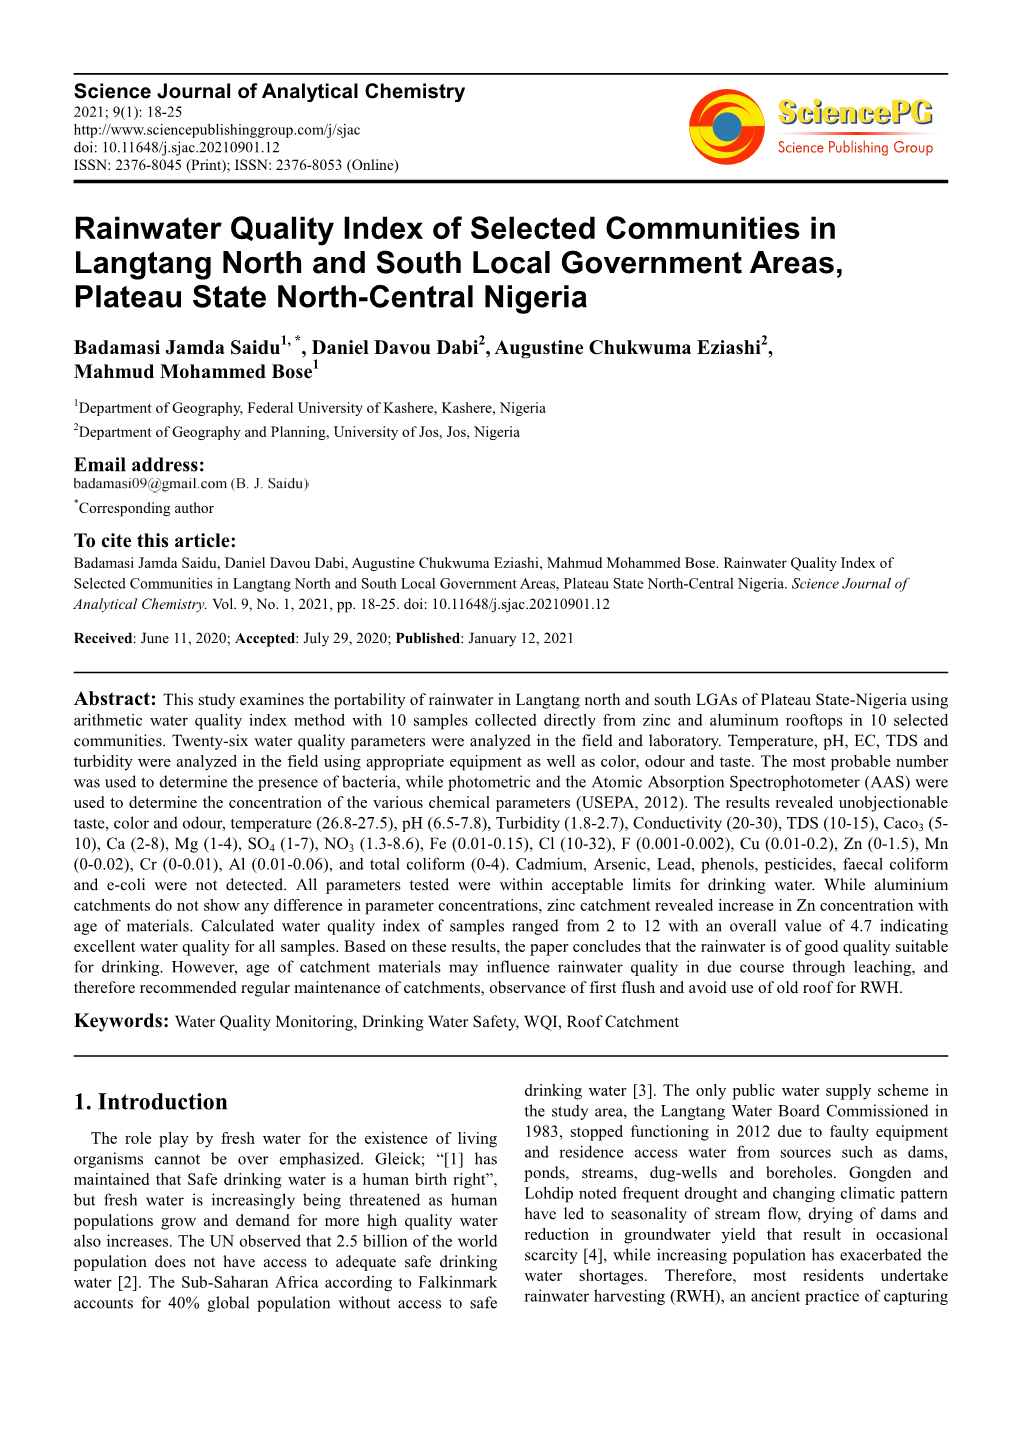 Rainwater Quality Index of Selected Communities in Langtang North and South Local Government Areas, Plateau State North-Central Nigeria